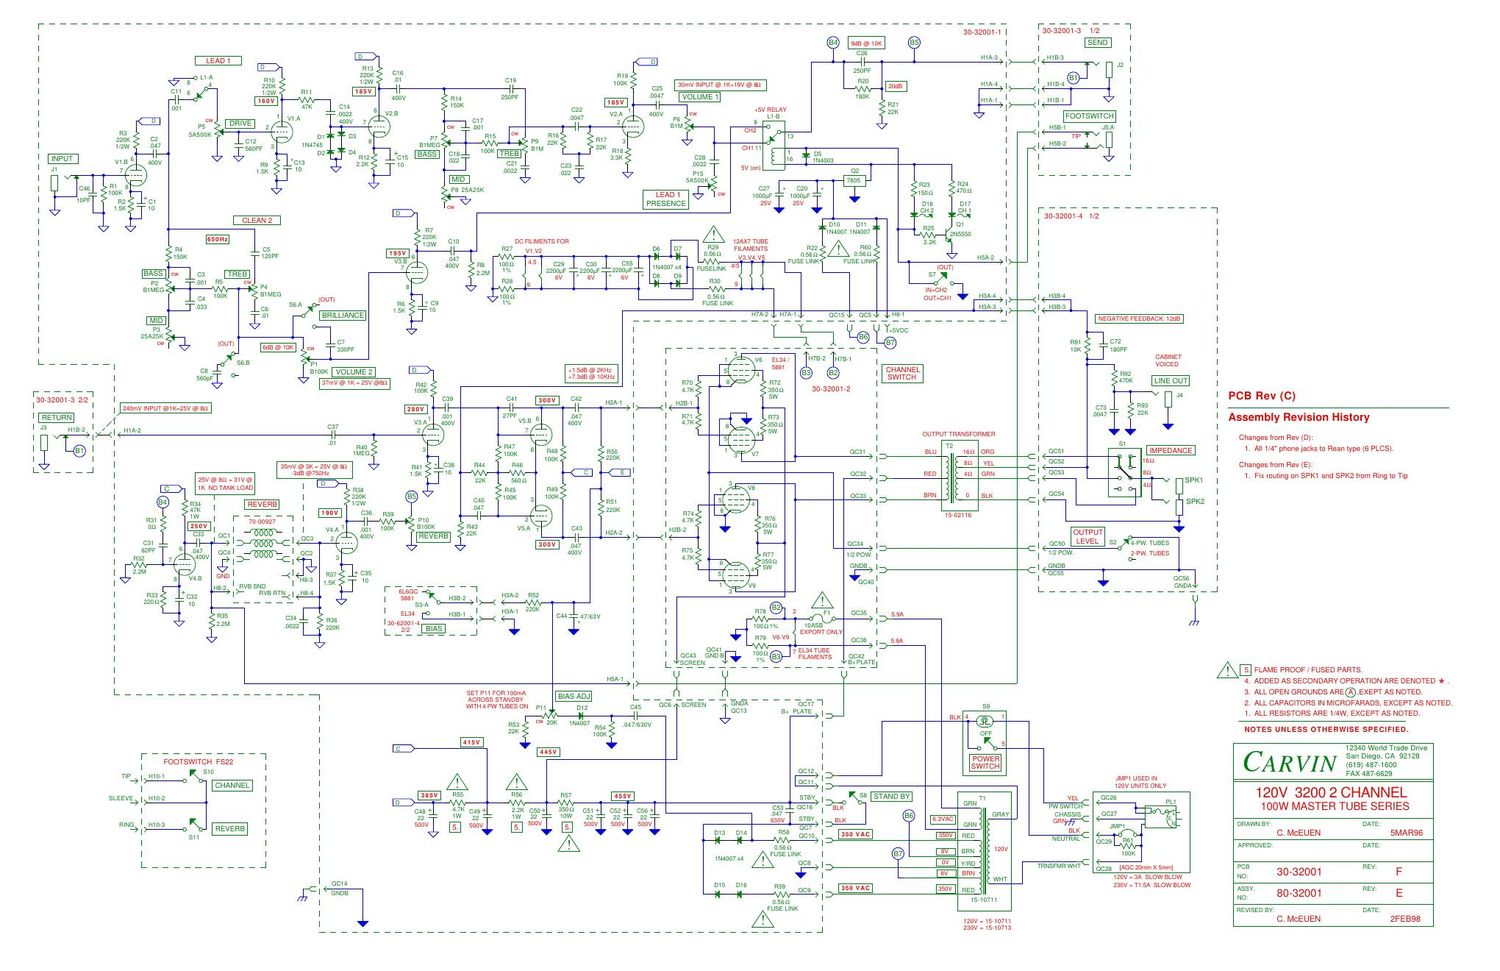 carvin mts 3200 schematic